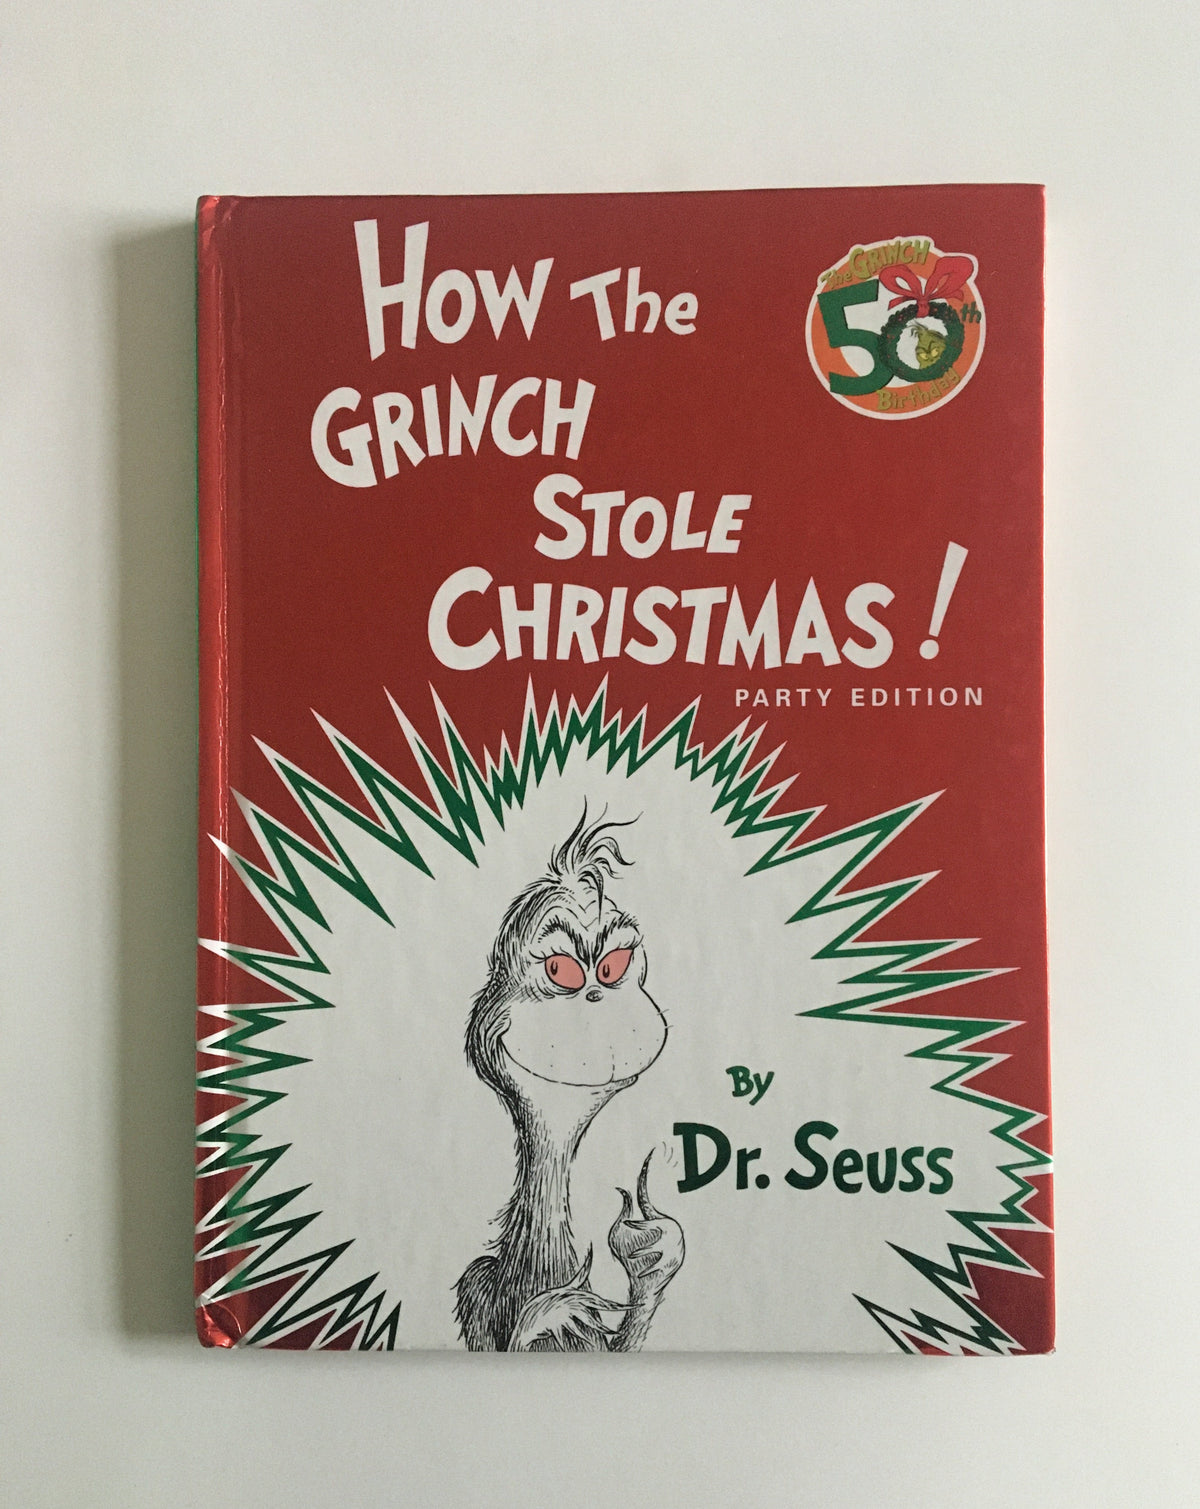 How the Grinch Stole Christmas by Dr. Seuss